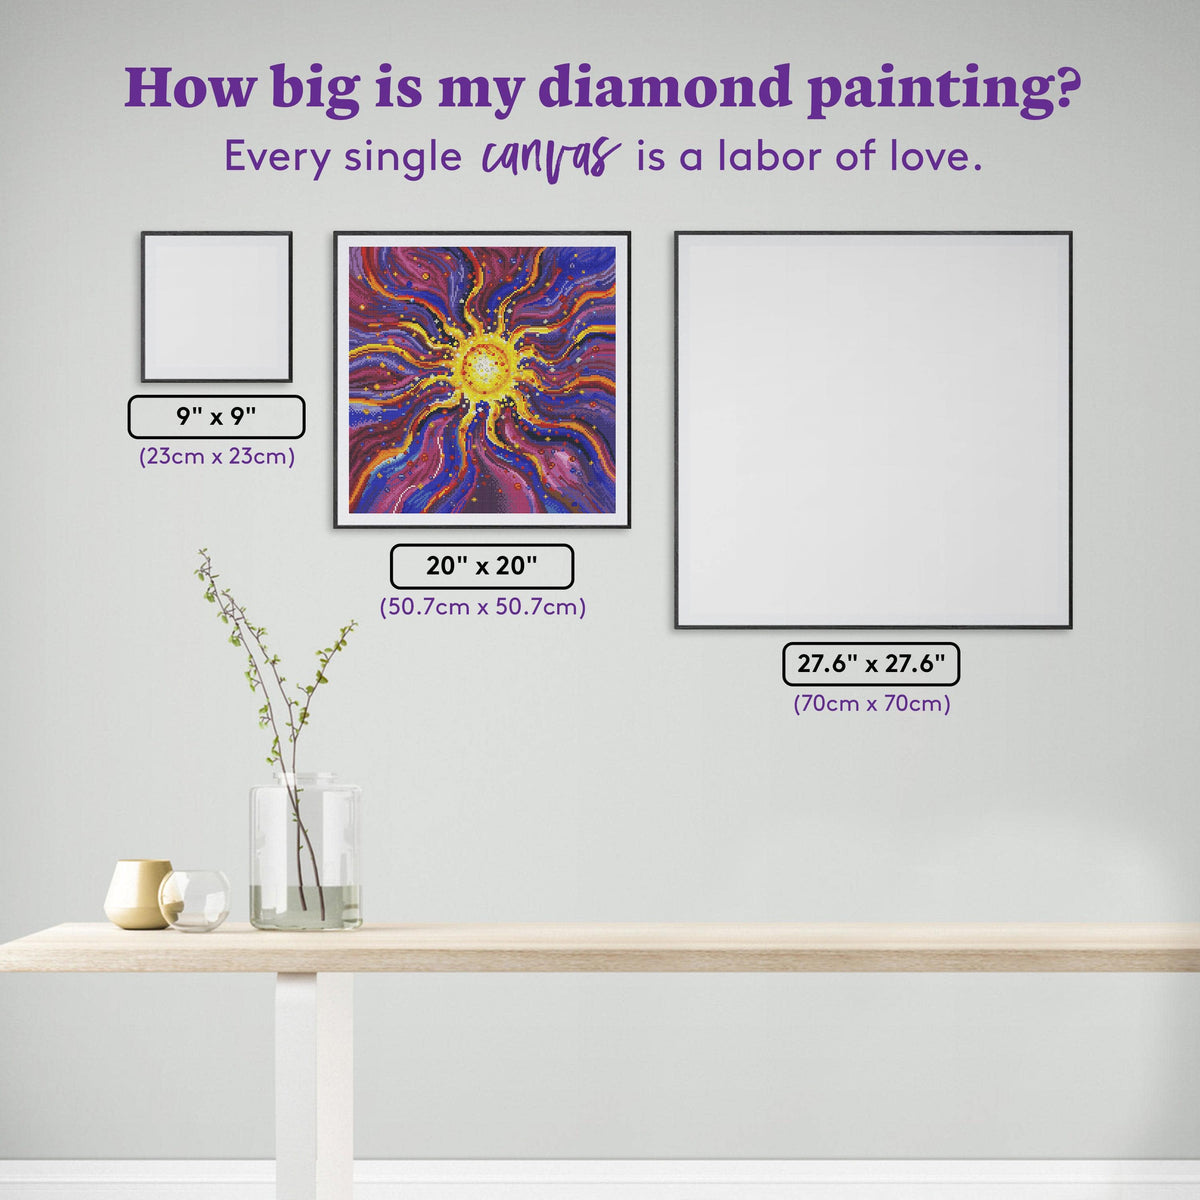 Diamond Painting El Sol 20" x 20" (50.7cm x 50.7cm) / Round with 35 Colors including 5 ABs / 32,761